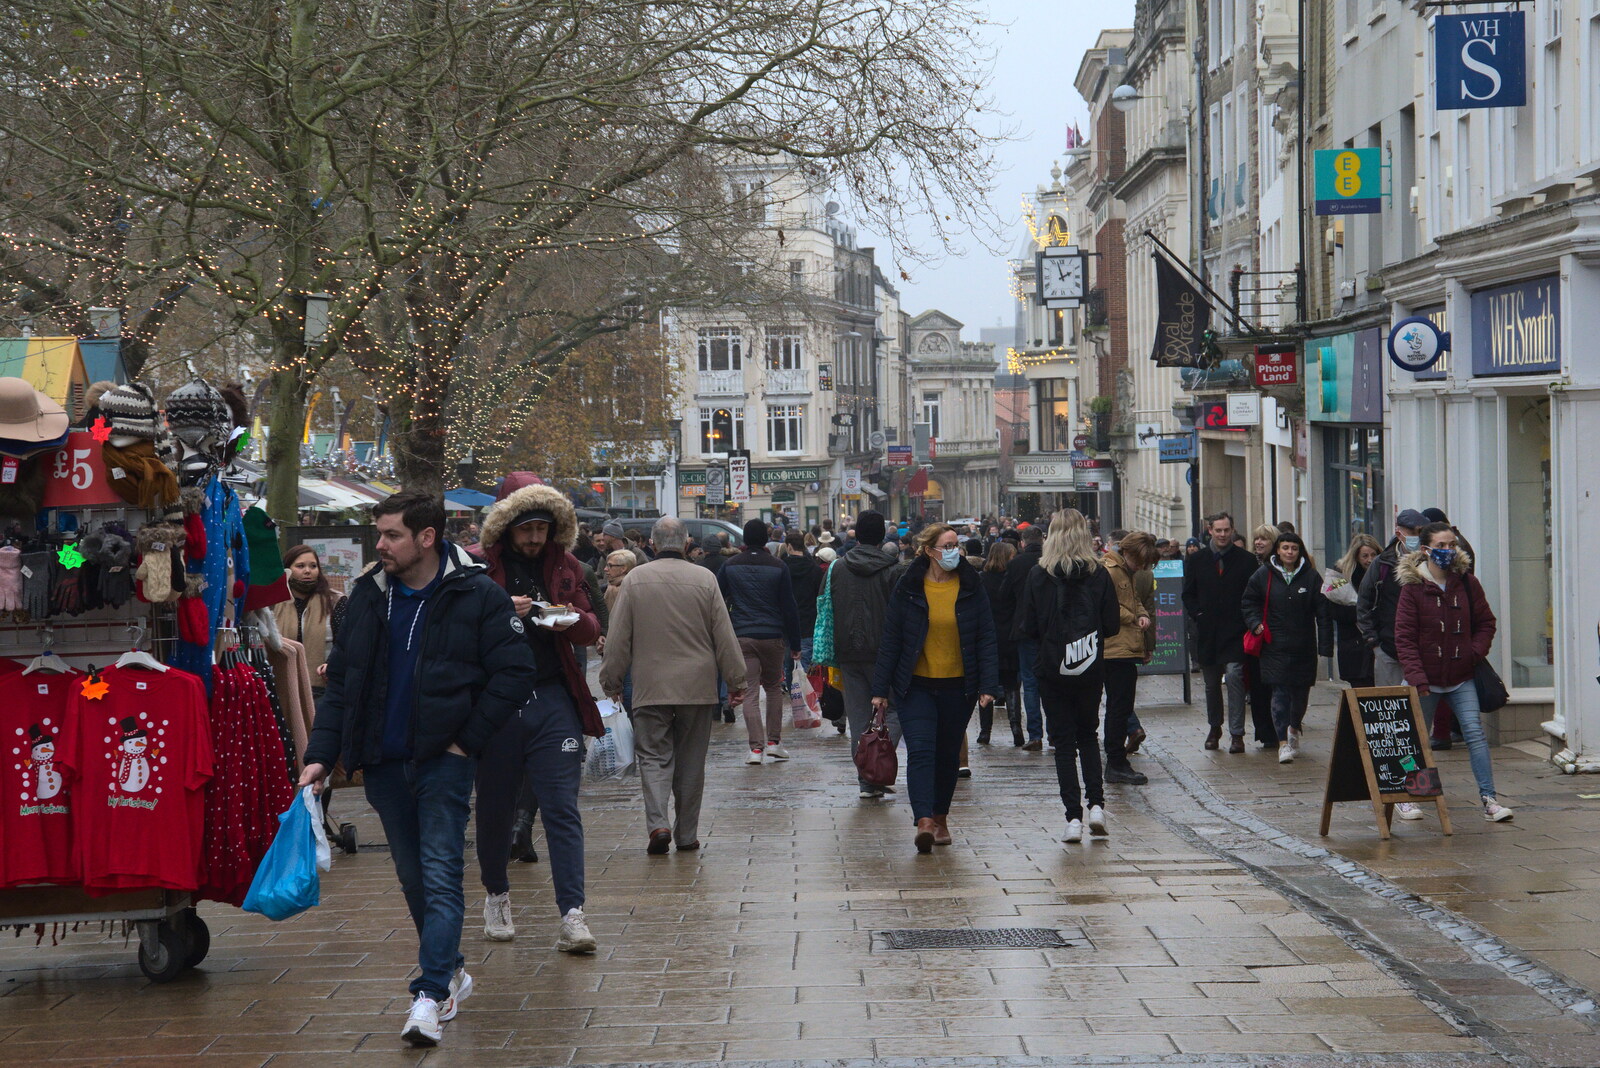 Gentleman's Walk is reasonably busy from Scooters and a Bit of Christmas Shopping, Eye and Norwich, Norfolk - 23rd December 2021